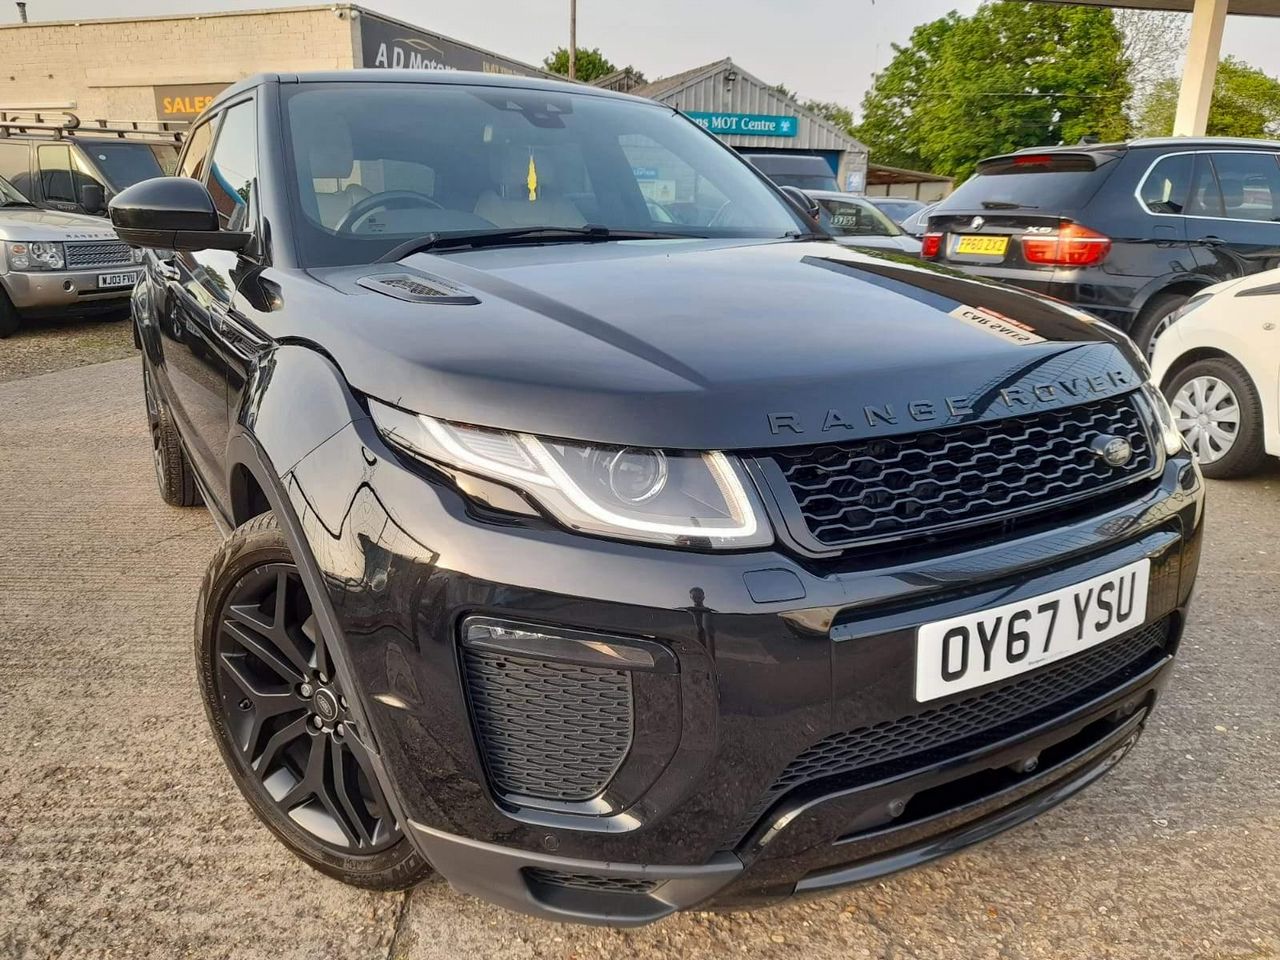 2017 Land Rover Range Rover Evoque 2.0 TD4 HSE Dynamic Auto 4WD Euro 6 (s/s) 5dr - Picture 13 of 53